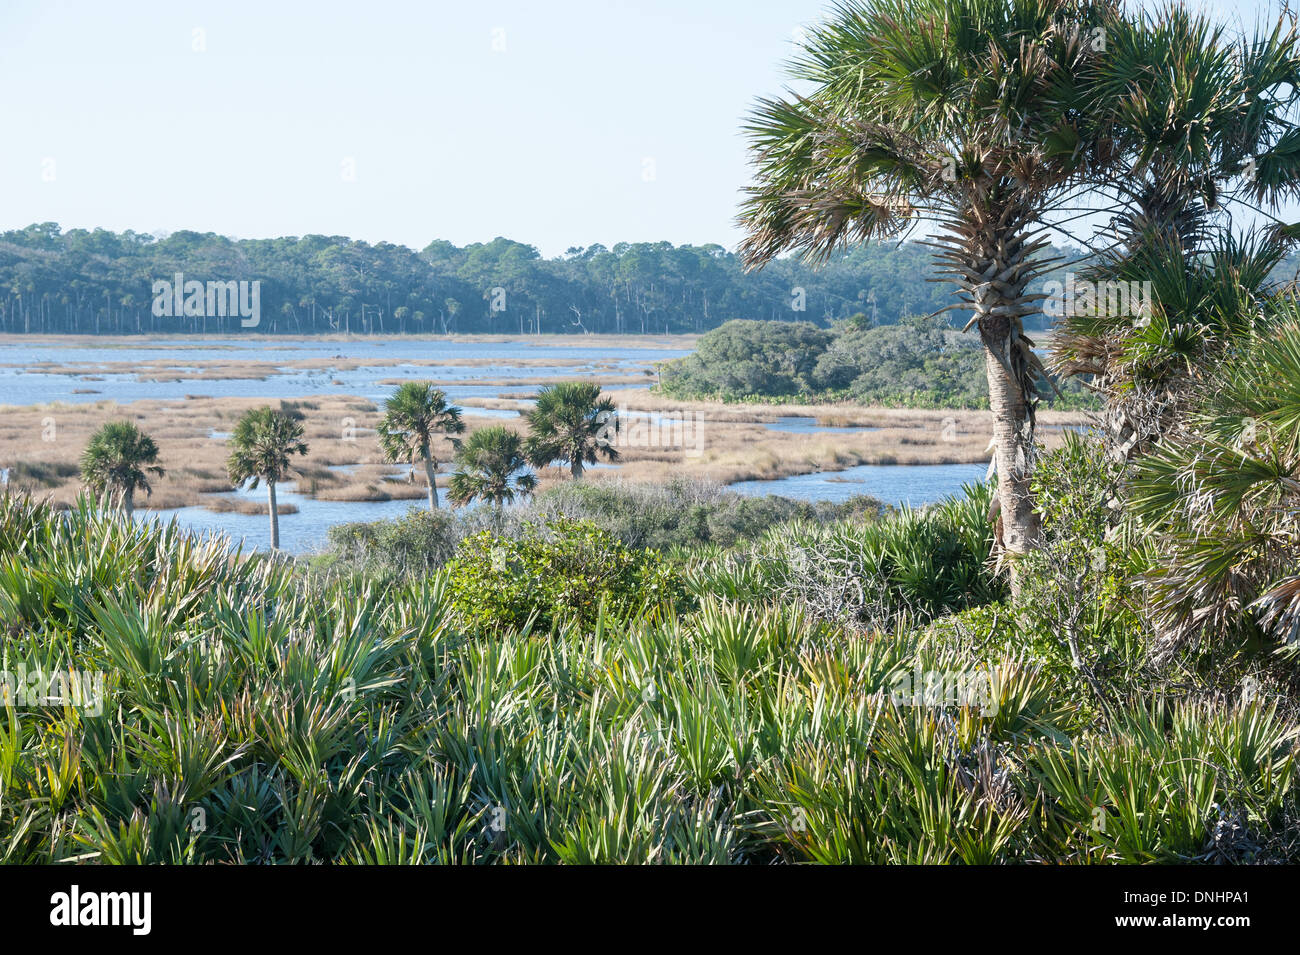 View of Guana River Wildlife Management Area from oceanside sand dunes at Ponte Vedra Beach, Florida Stock Photo